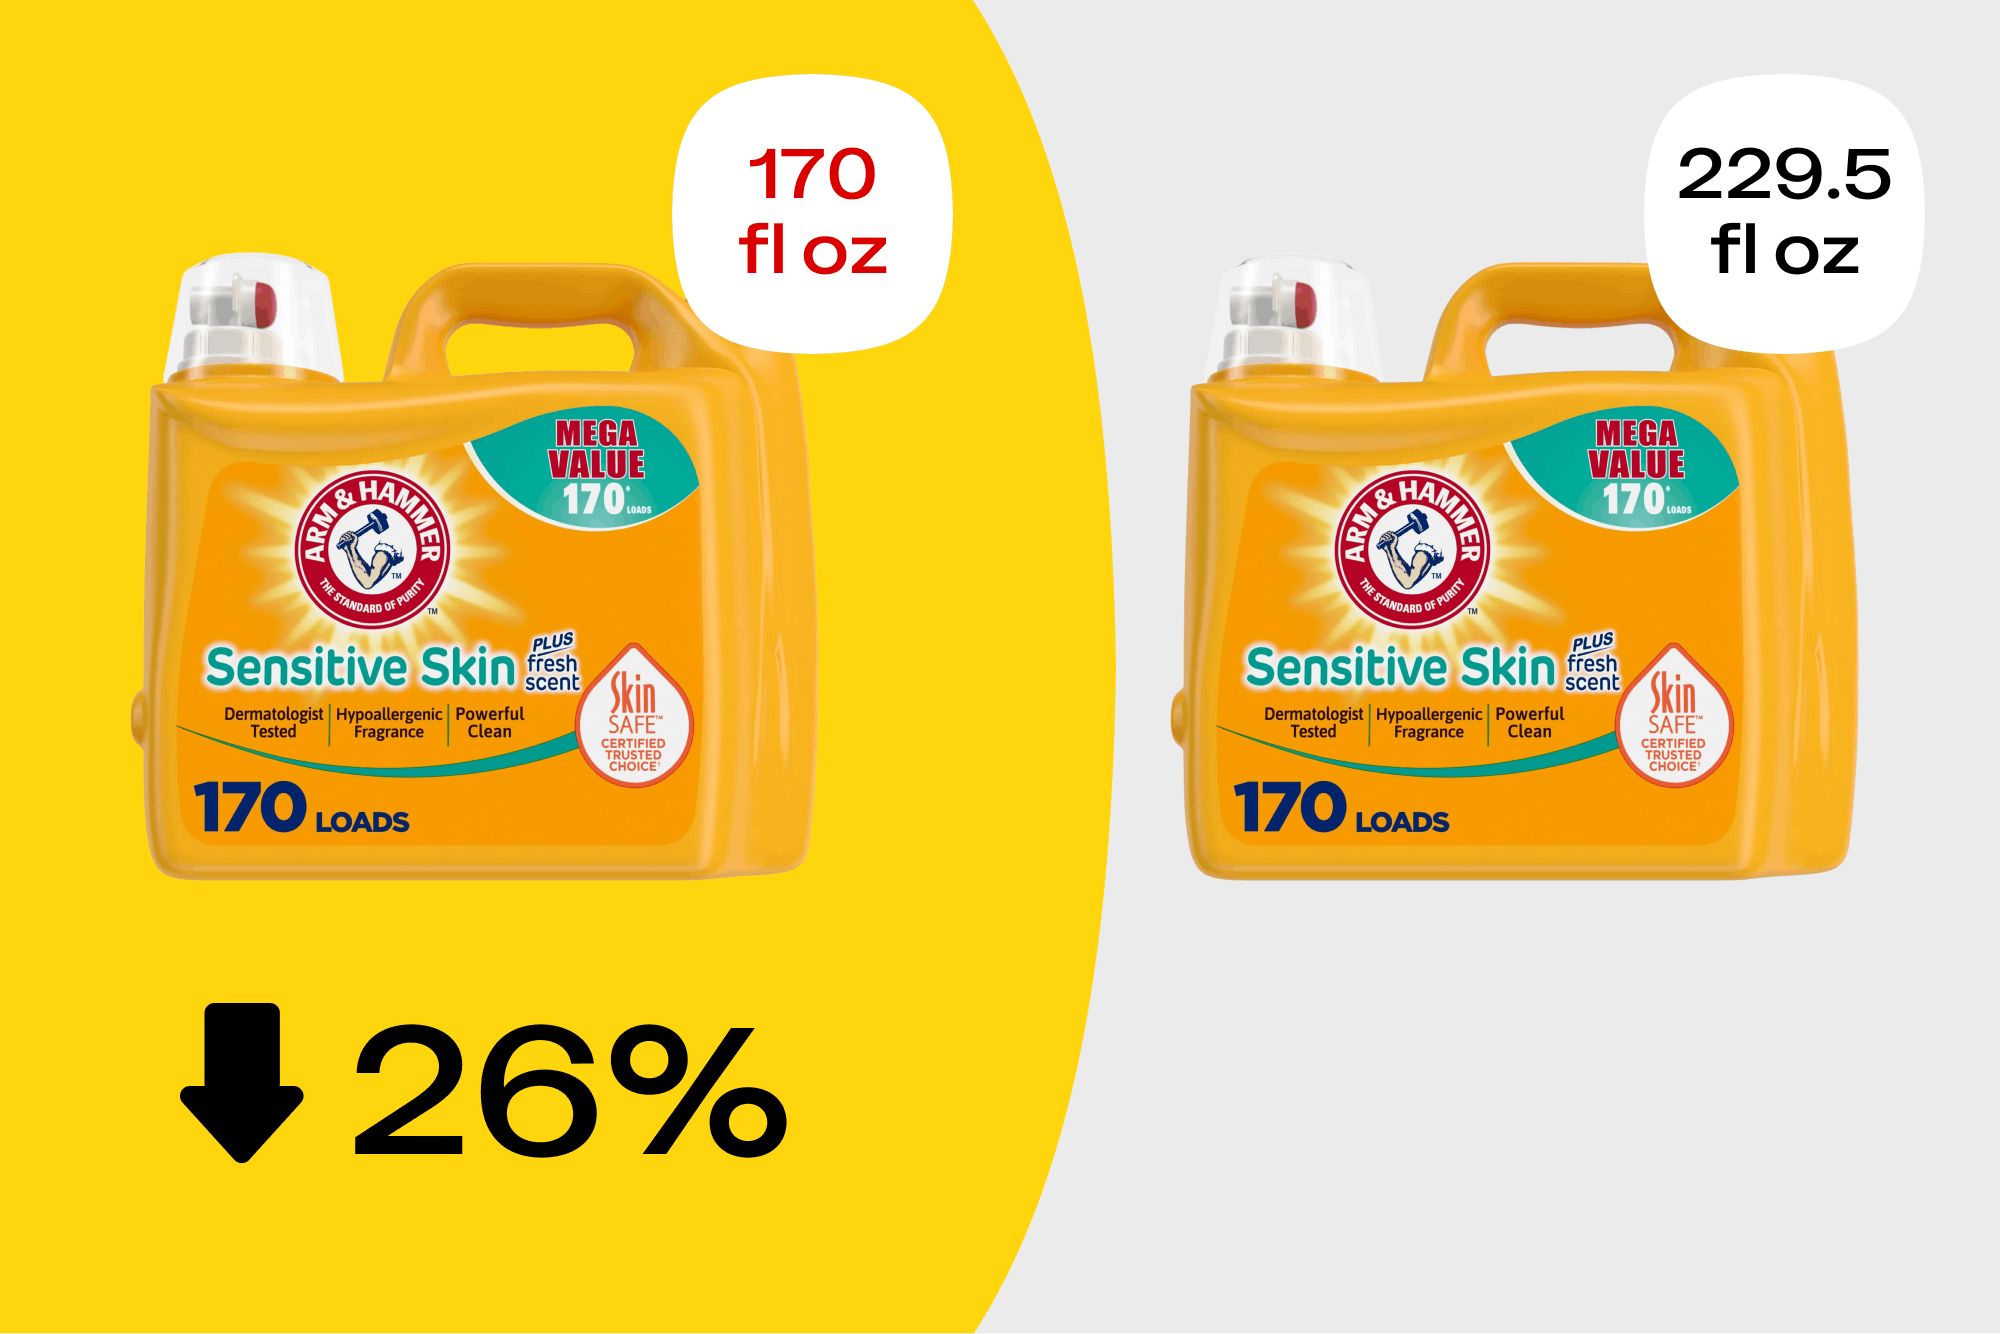 Graphic showing how Arm & Hammer detergent is 26% smaller thanks to shrinkflation